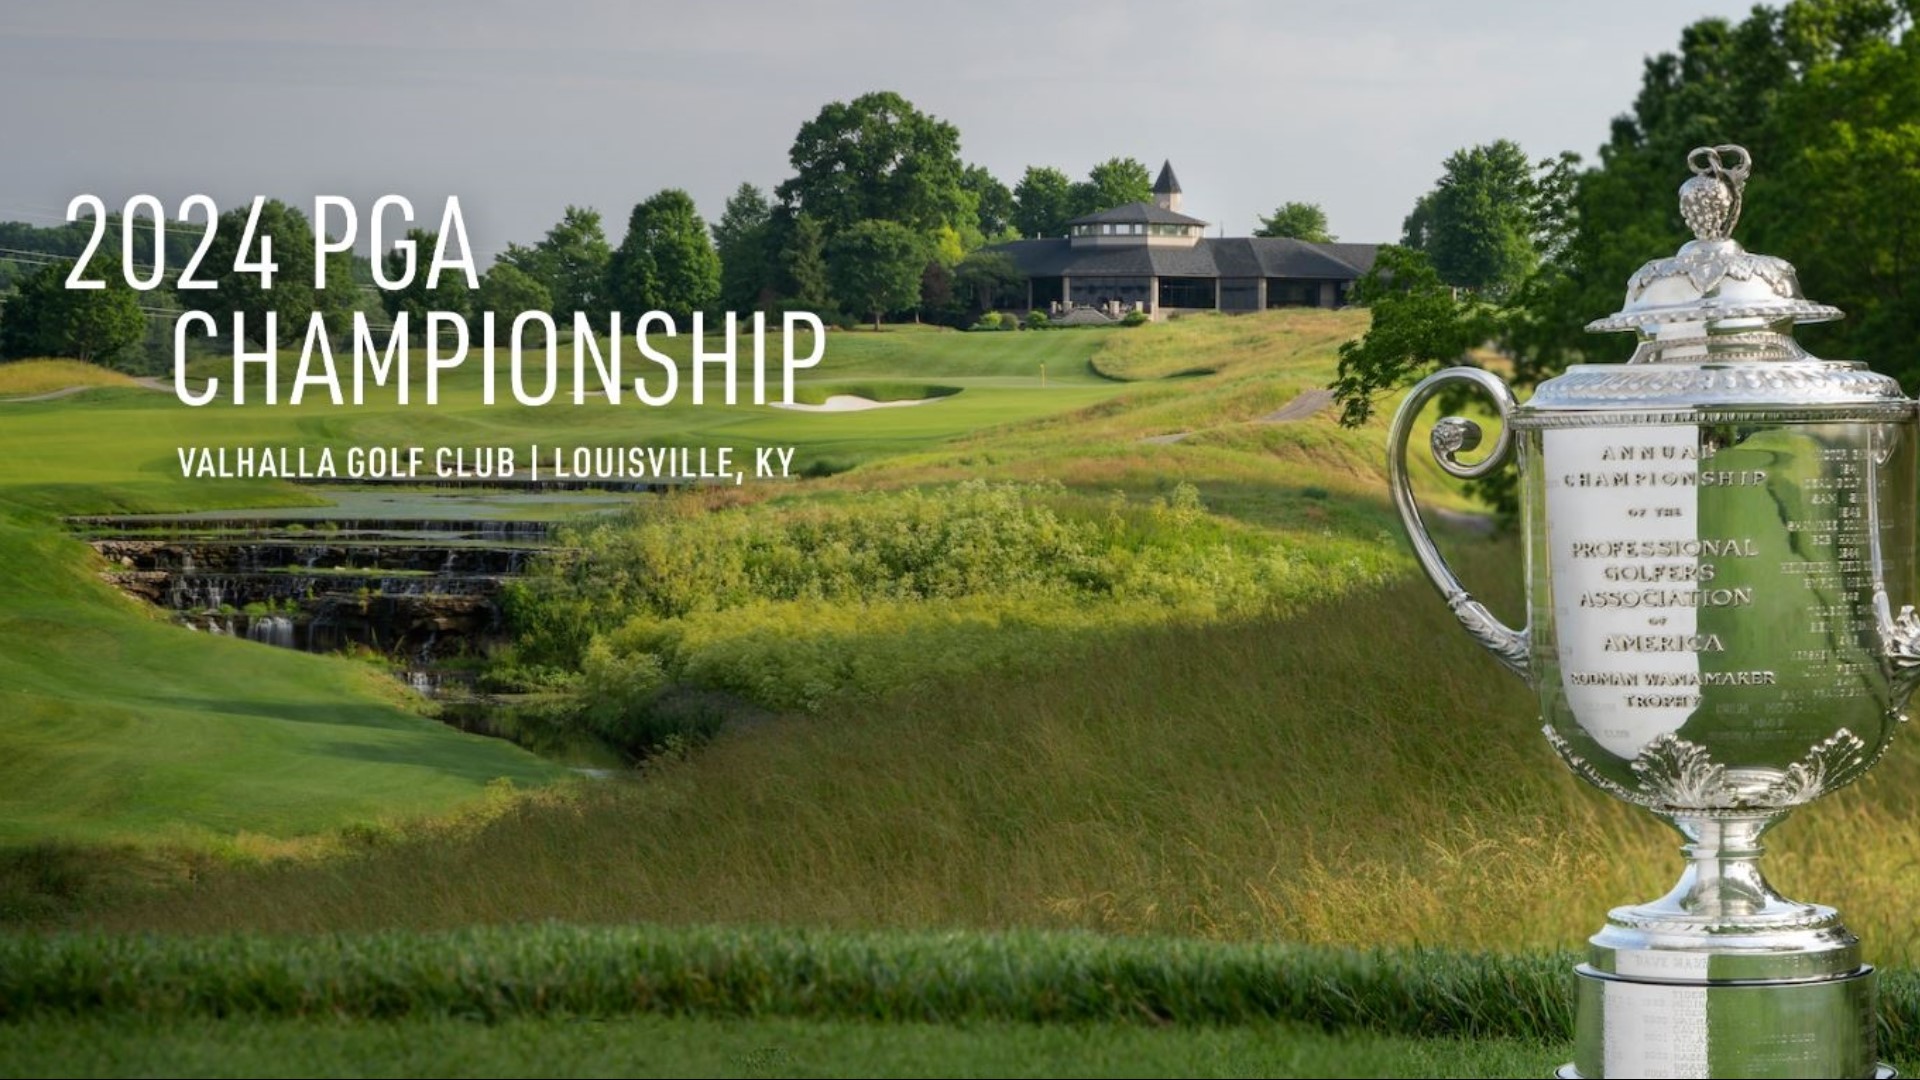 Registration for 2024 PGA Championship now open; ticket info here